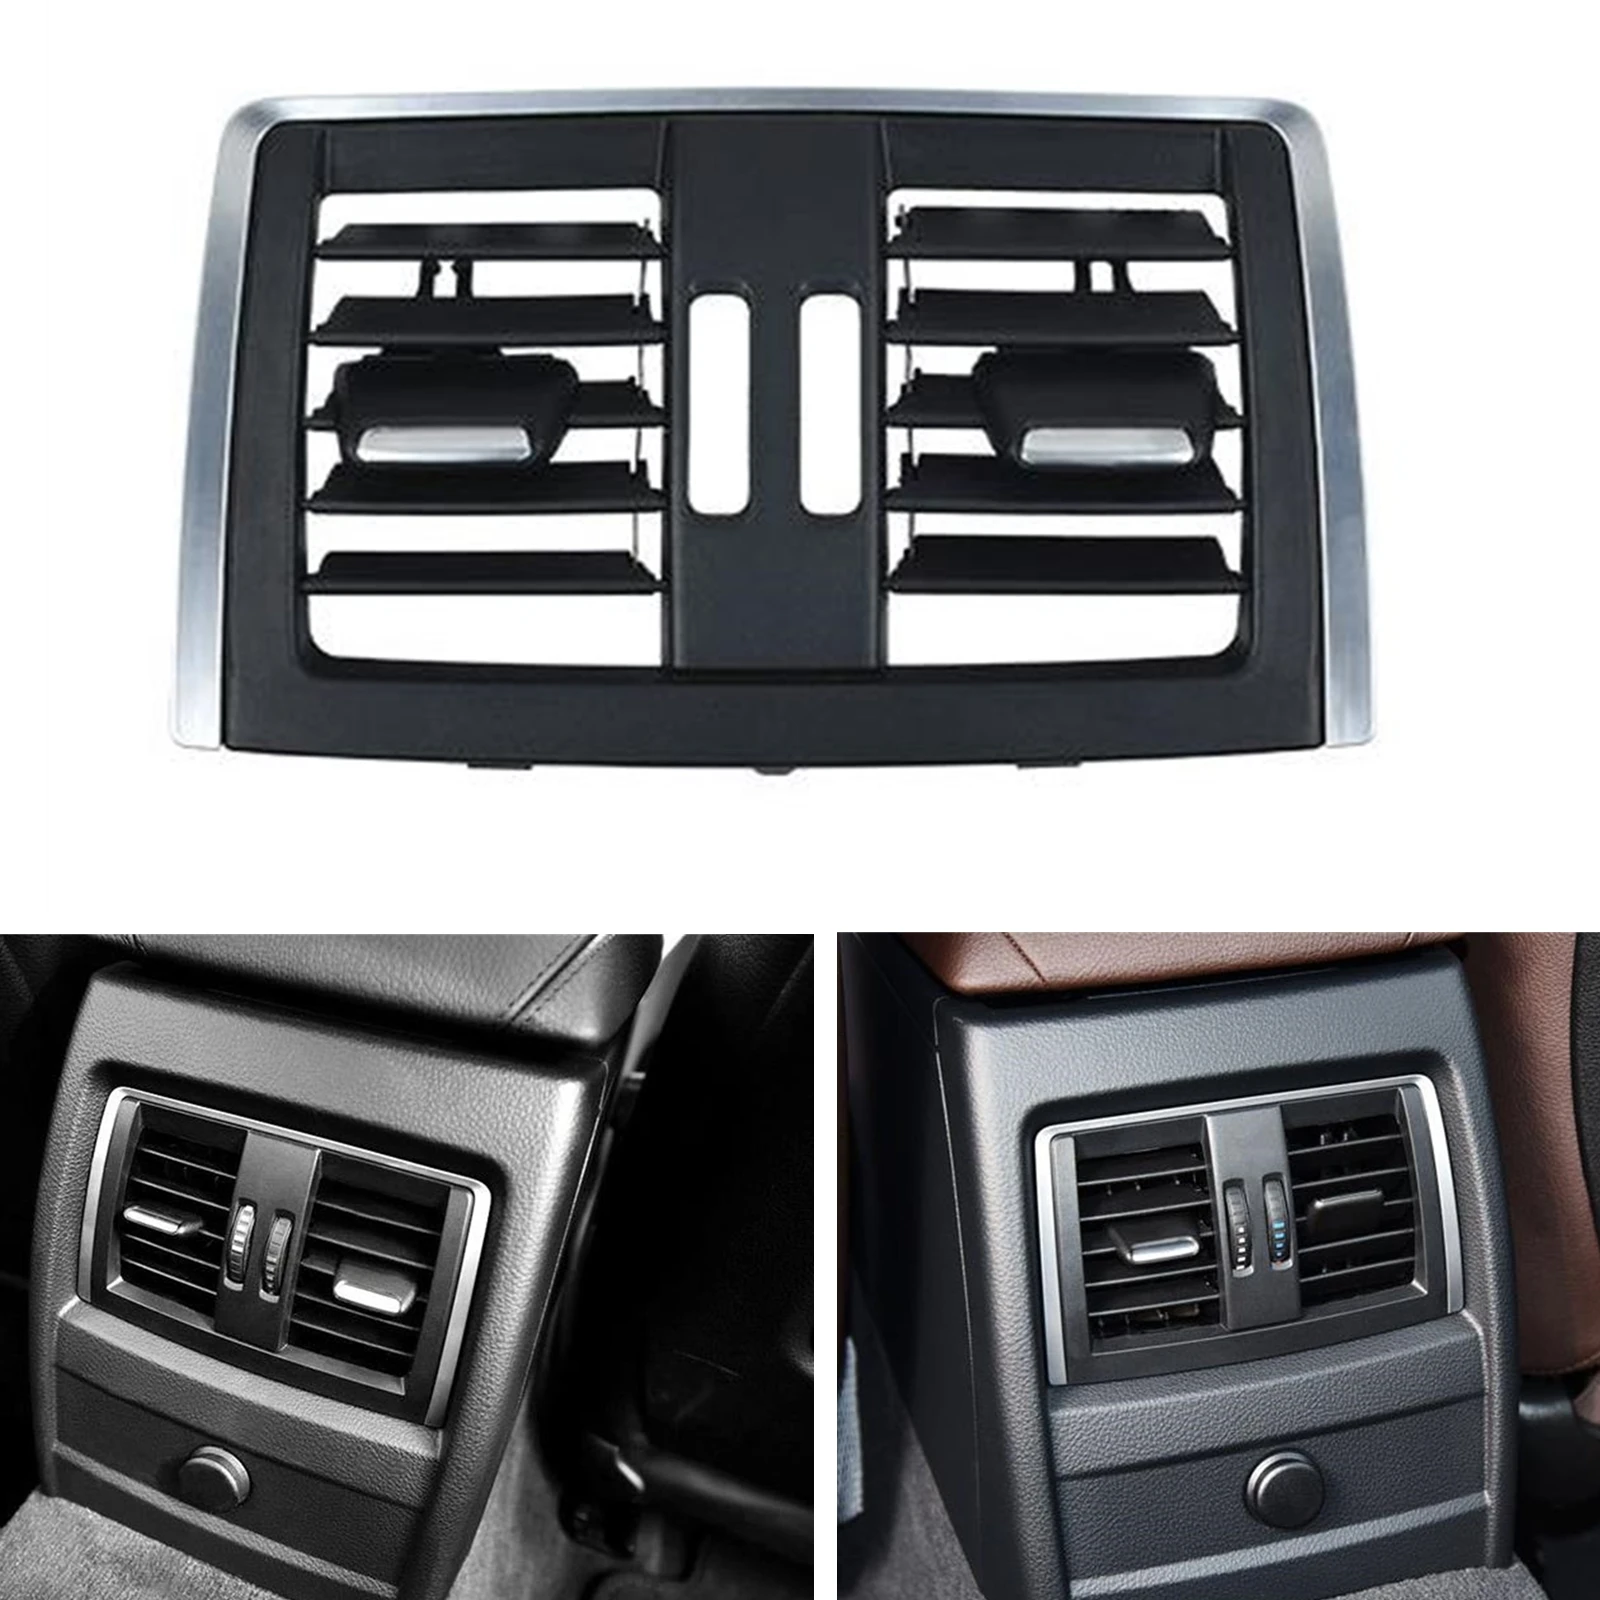 

Rear Center A/C Panel Air Outlet Vent Cover Grill For BMW 3 Series F30 F35 318 320 2014-2020 Dashboard Conditioning Fresh Grille